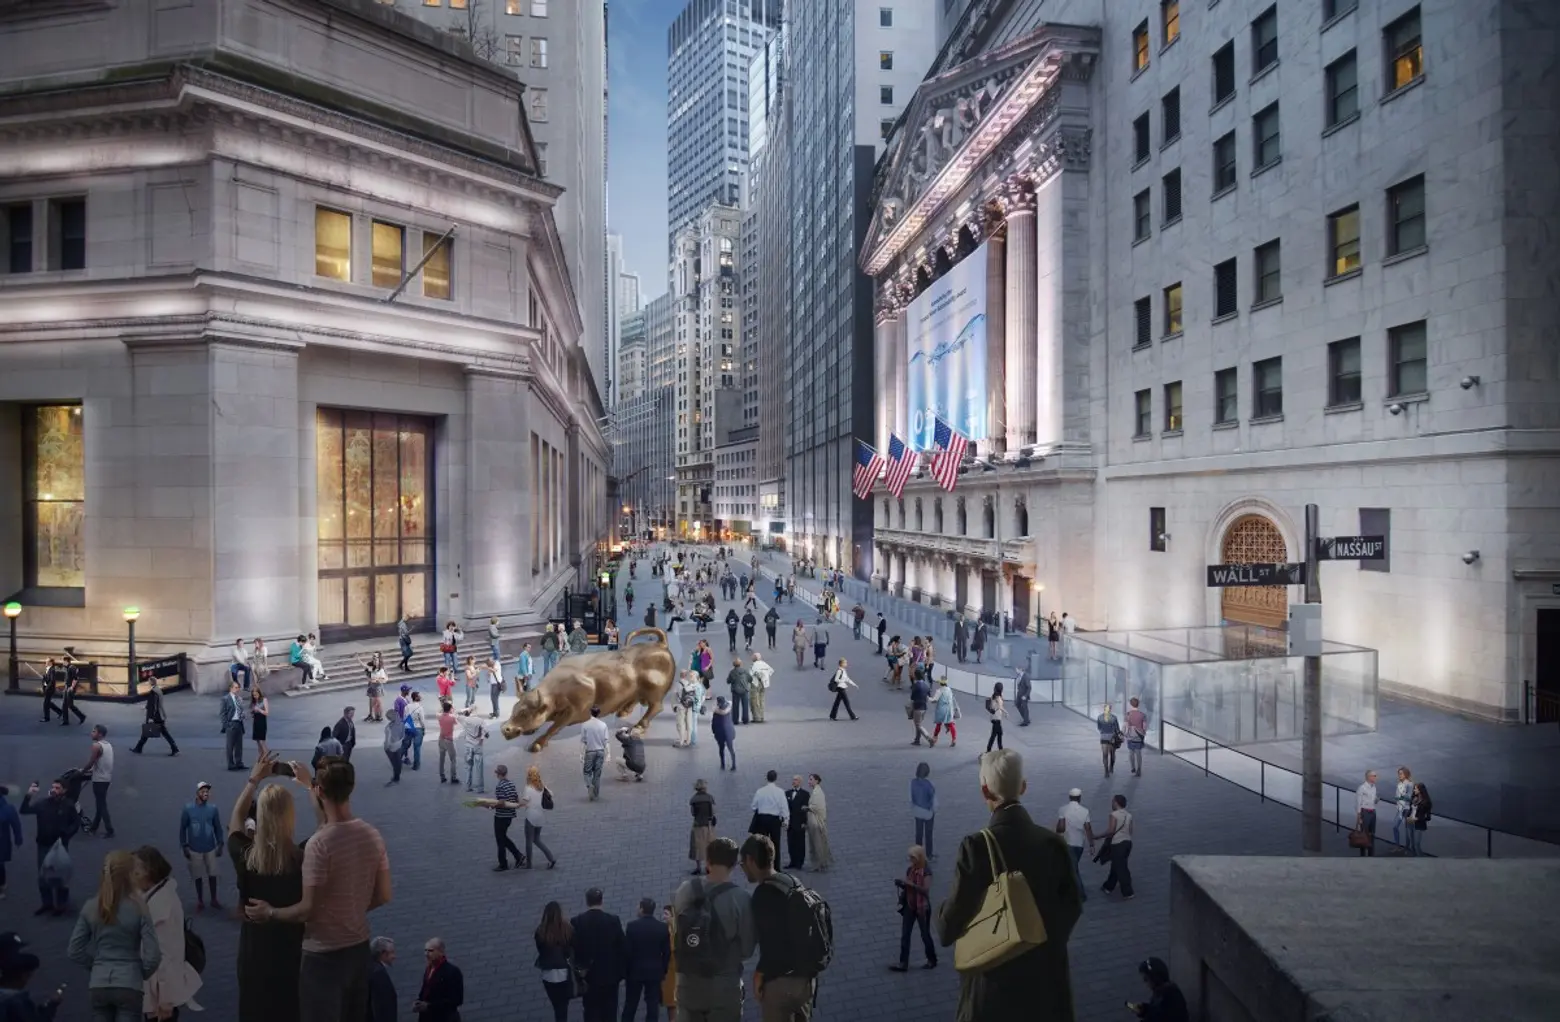 Proposal for NYSE district overhaul calls for curbless streets, greenery and enhanced lighting